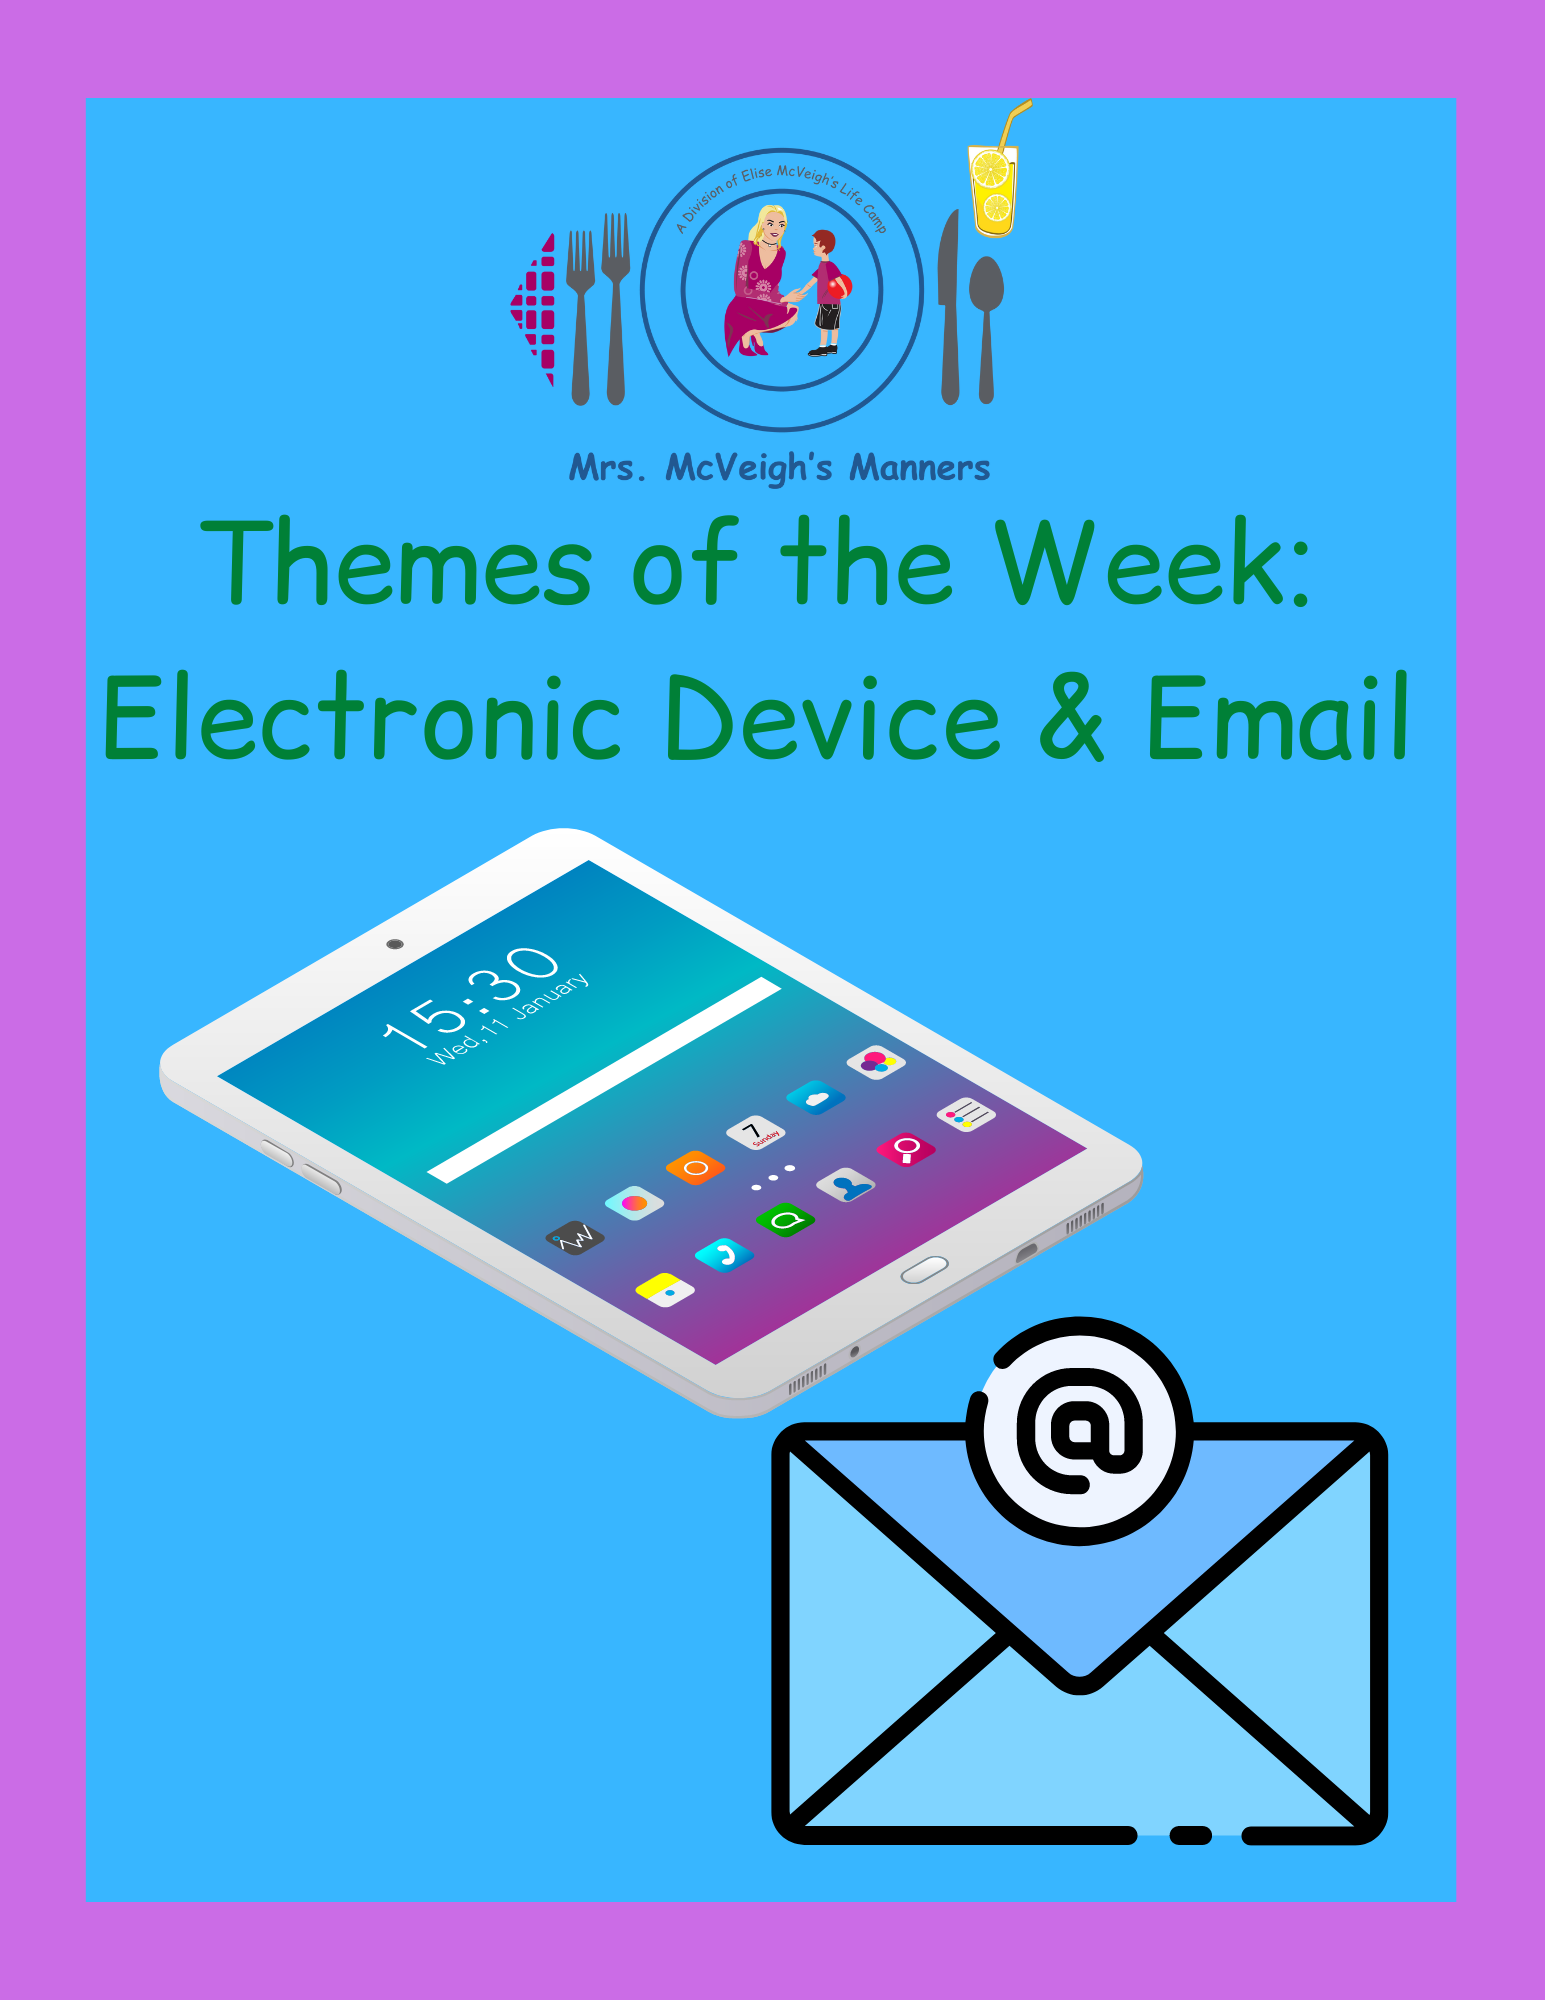 Mrs. McVeigh’s Manners Themes of the Week Electronic Devices and Email